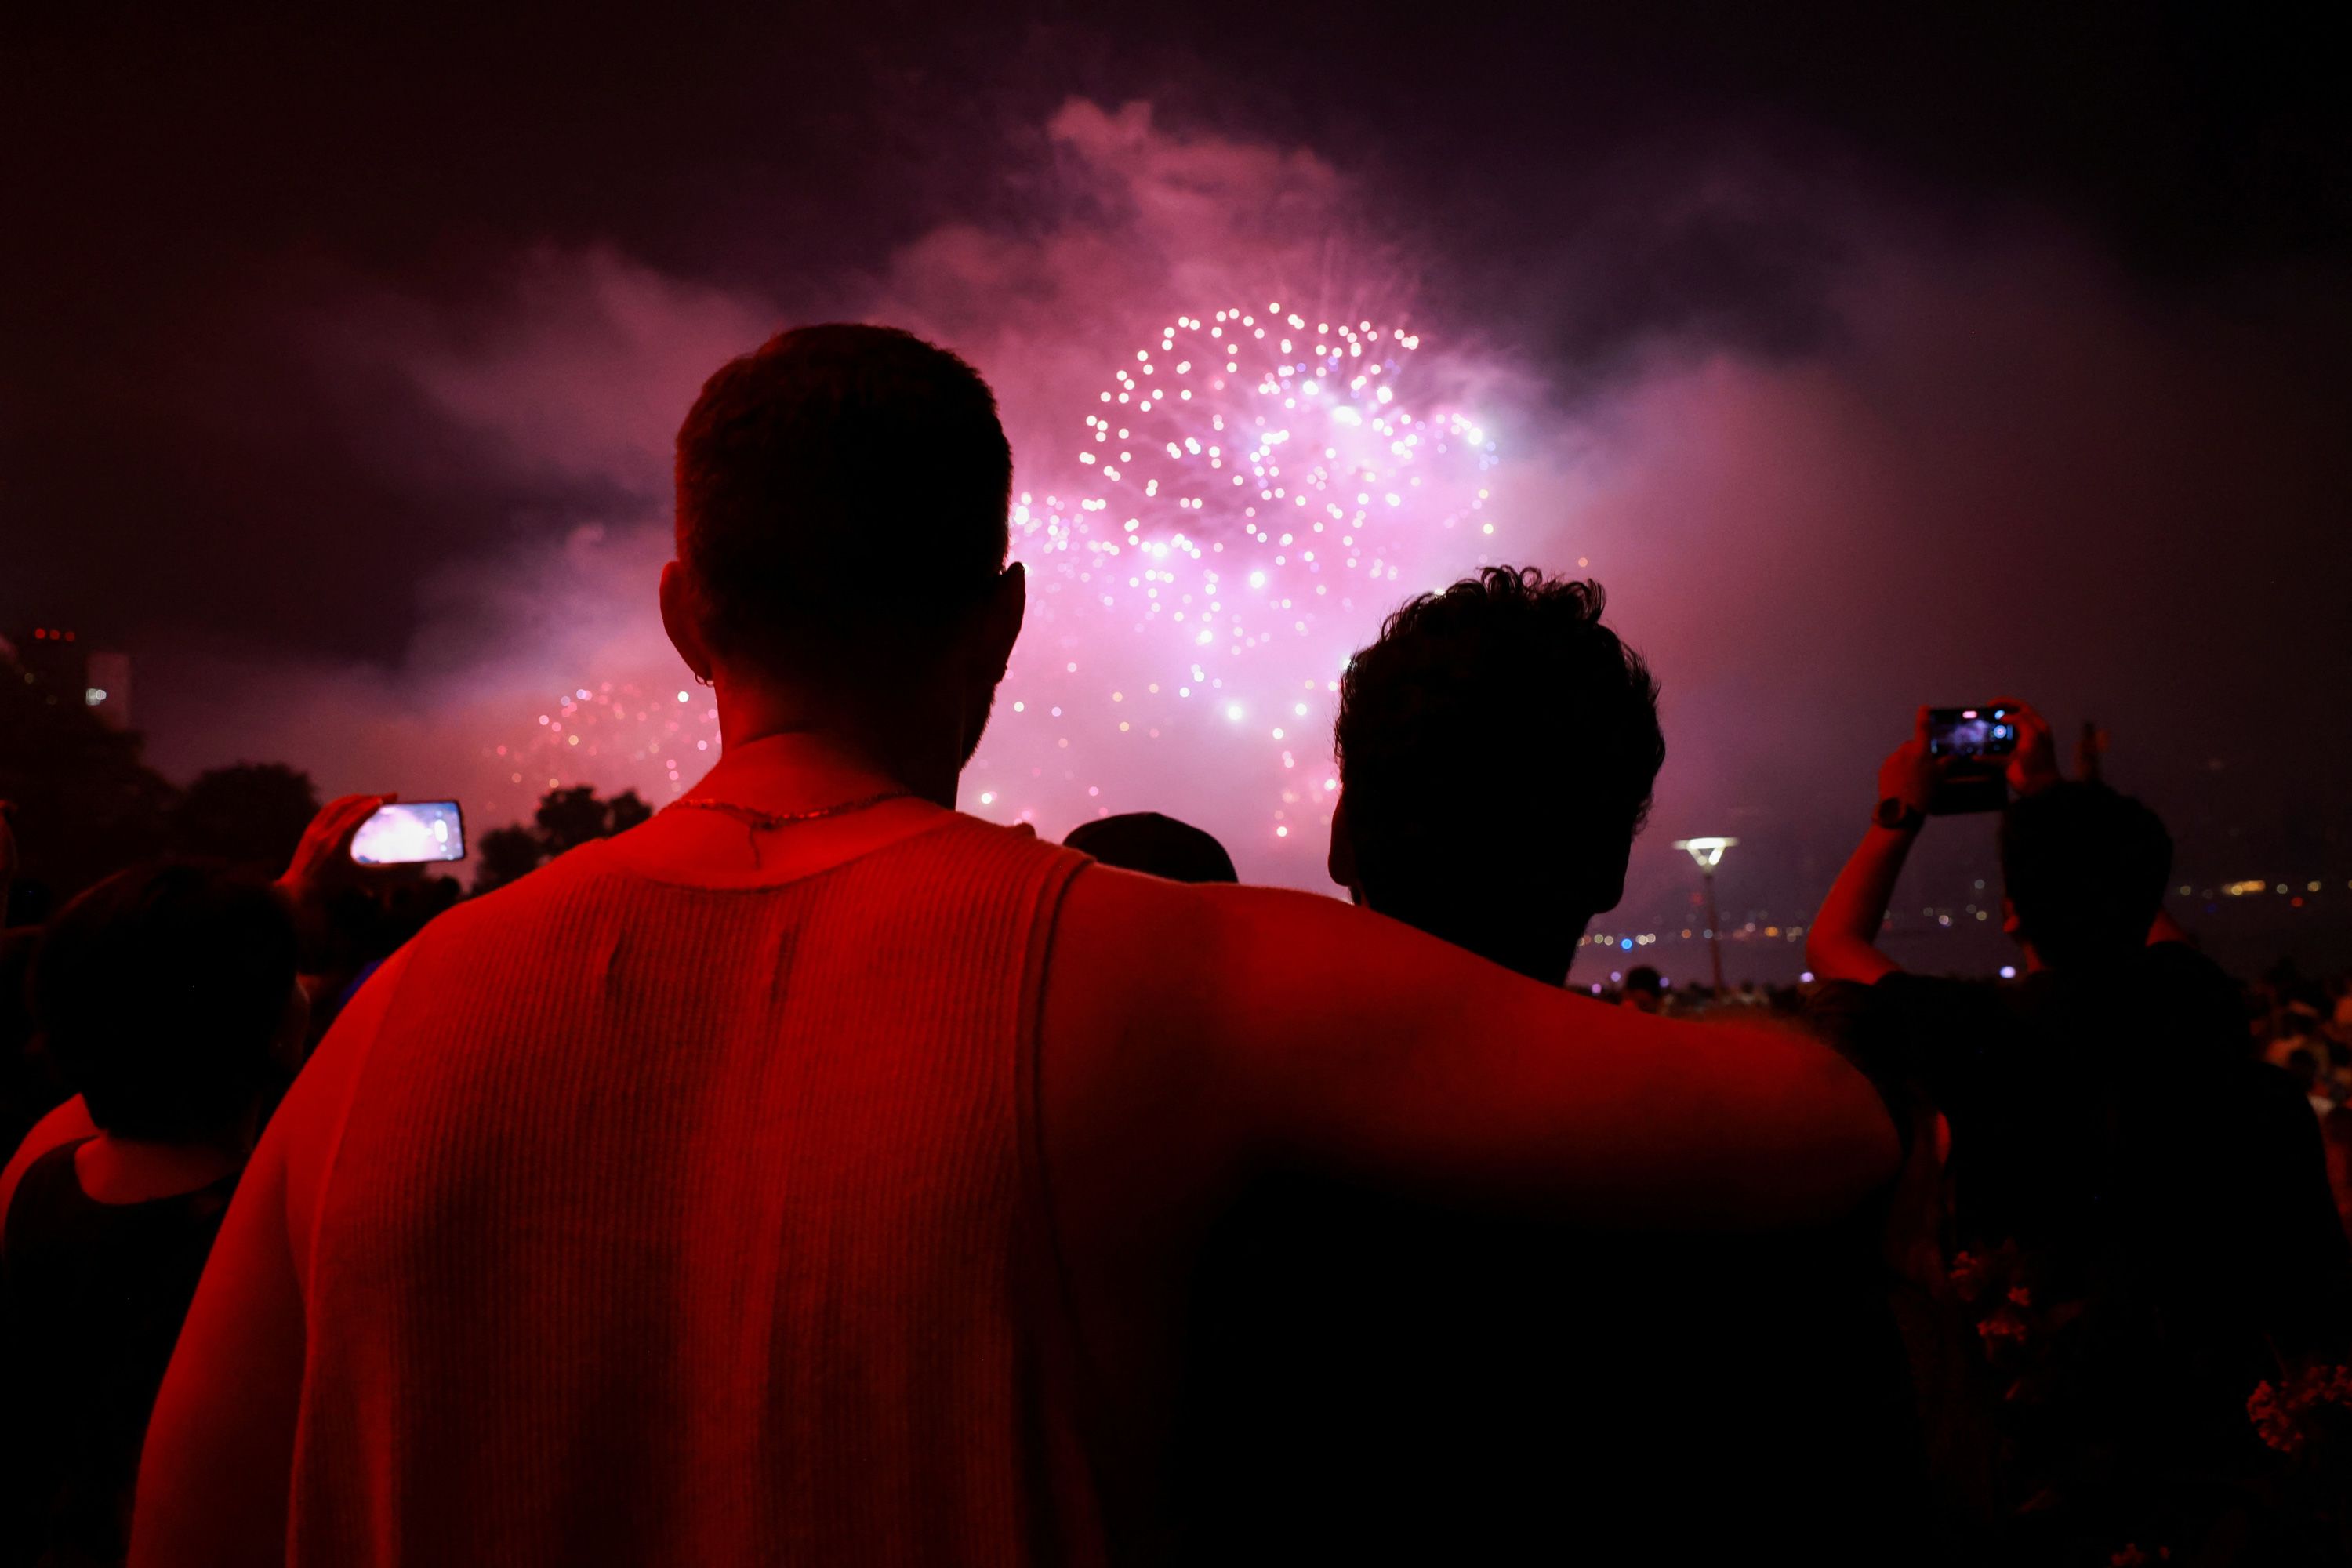 Spectators watch the Macy's Fourth of July fireworks in New York City on Tuesday, July 4.